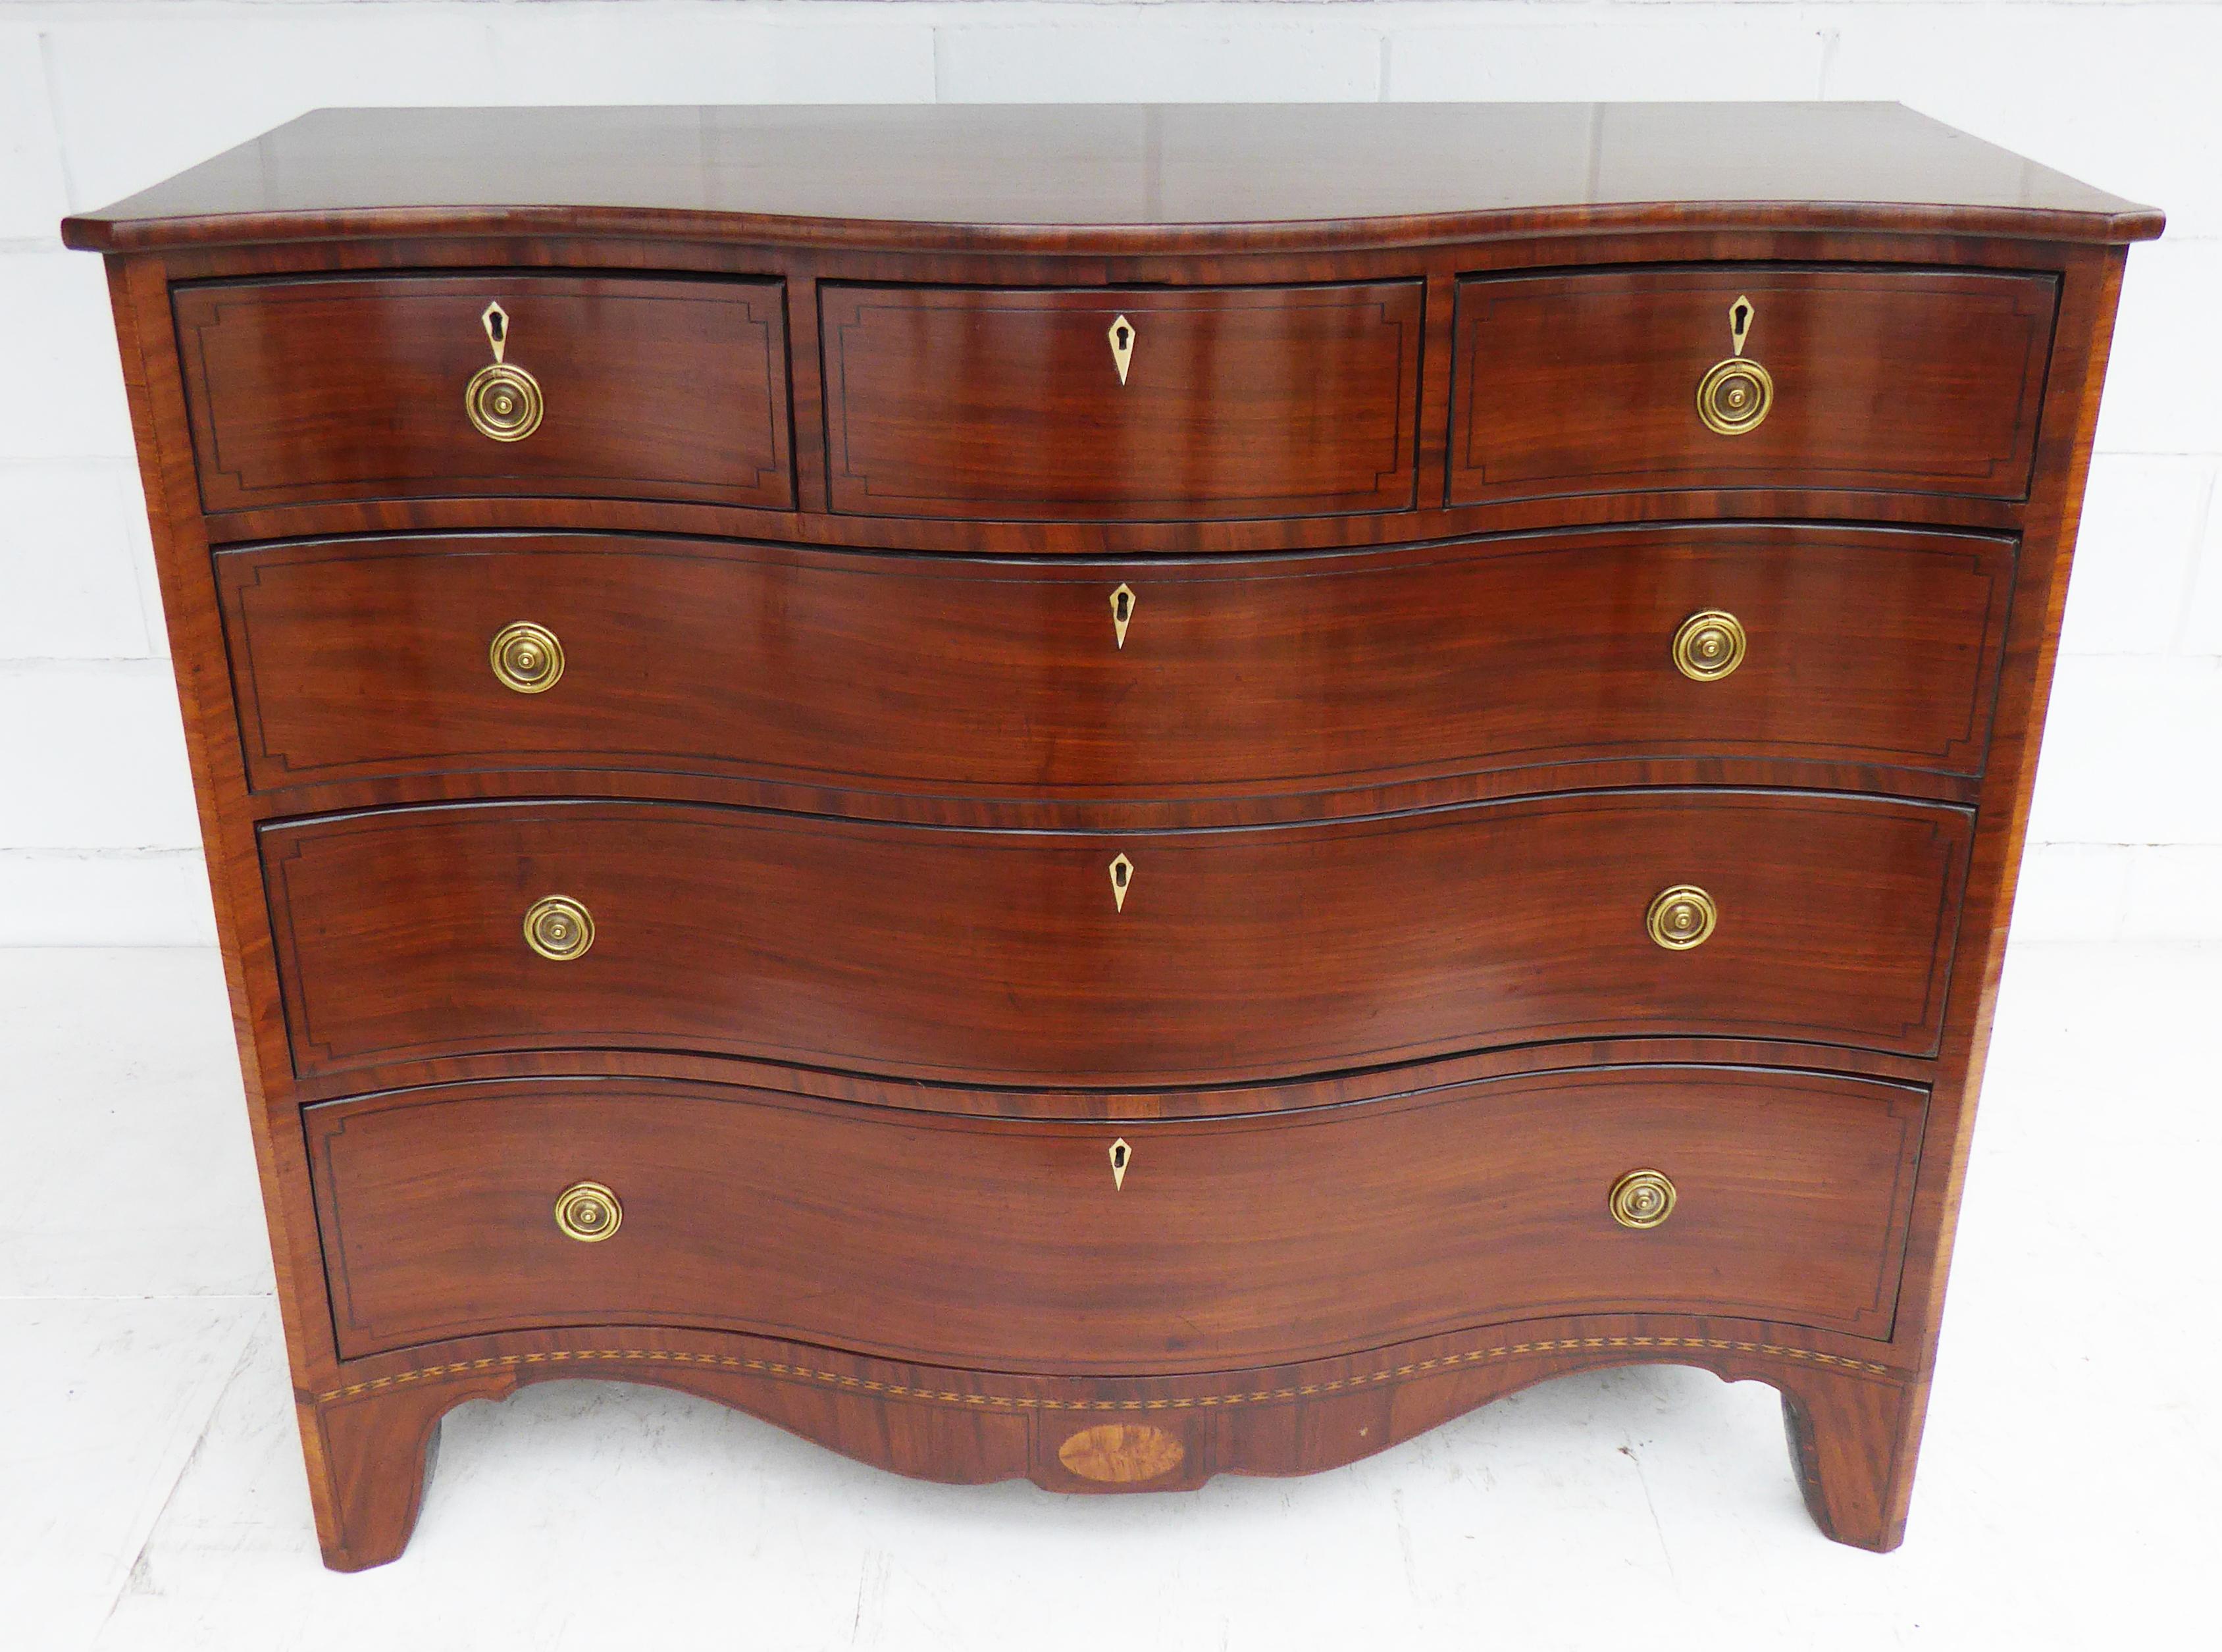 For sale is a top quality George II mahogany serpentine chest of drawers. The chest has an arrangement of three short drawers at the top, with a further three long drawers below. Each with brass ring handles and original escutcheons. The chest of